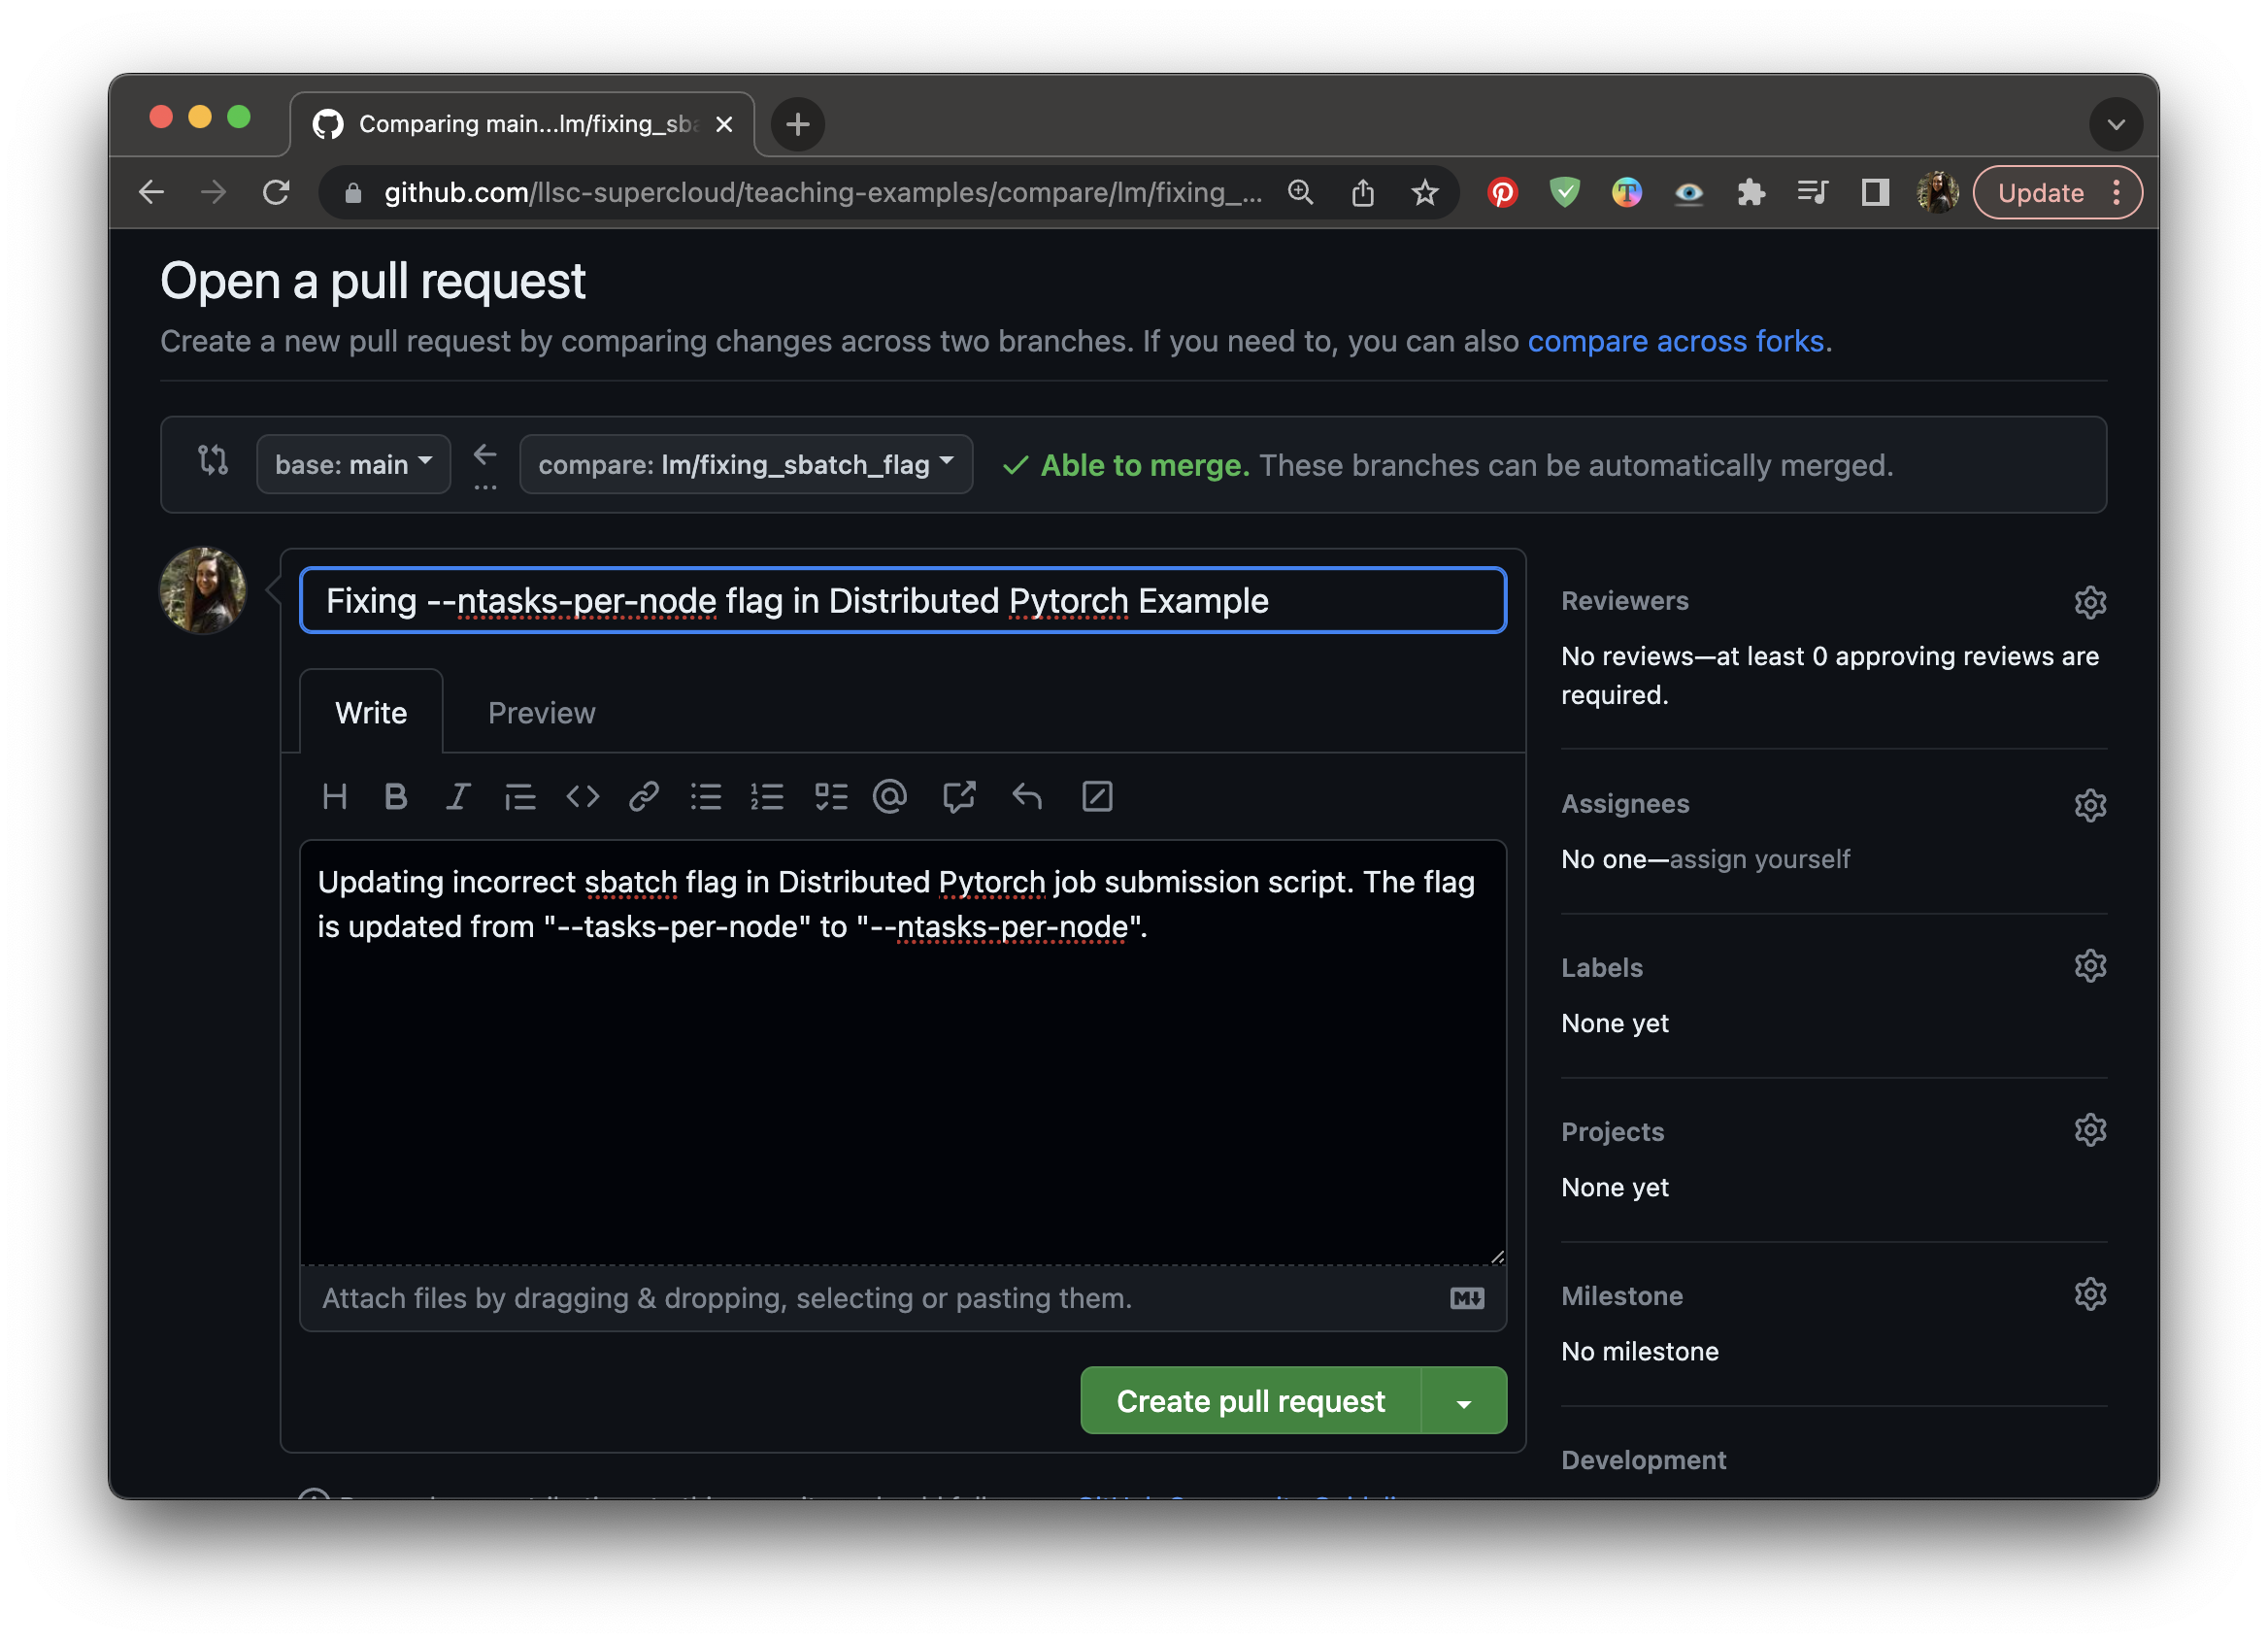 A screenshot of a Pull Request form on GitHub.